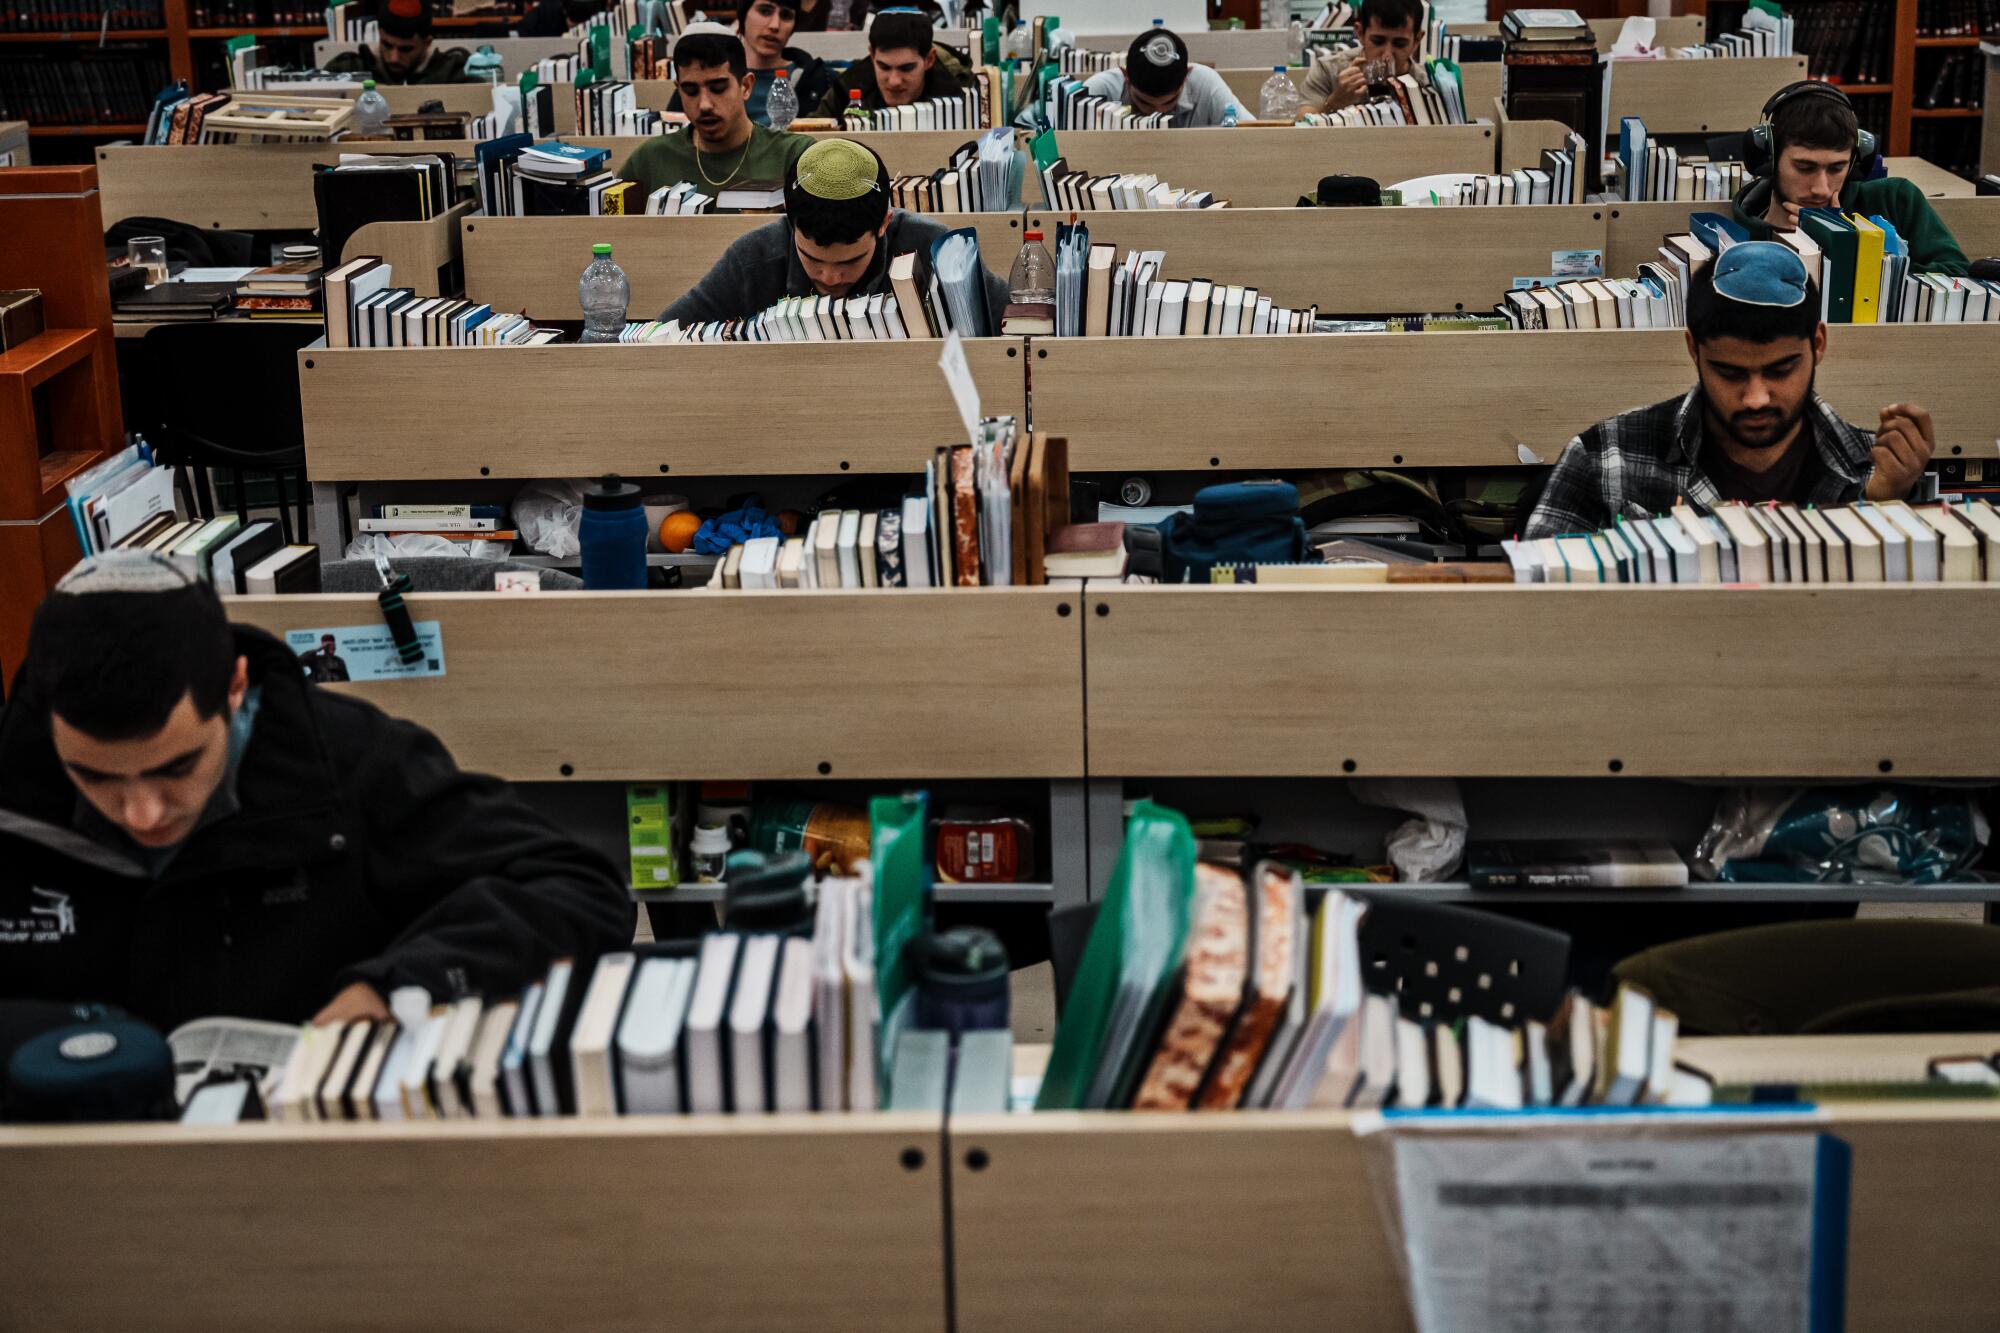 Young men in yarmulkes study at row after row of book-filled desks.